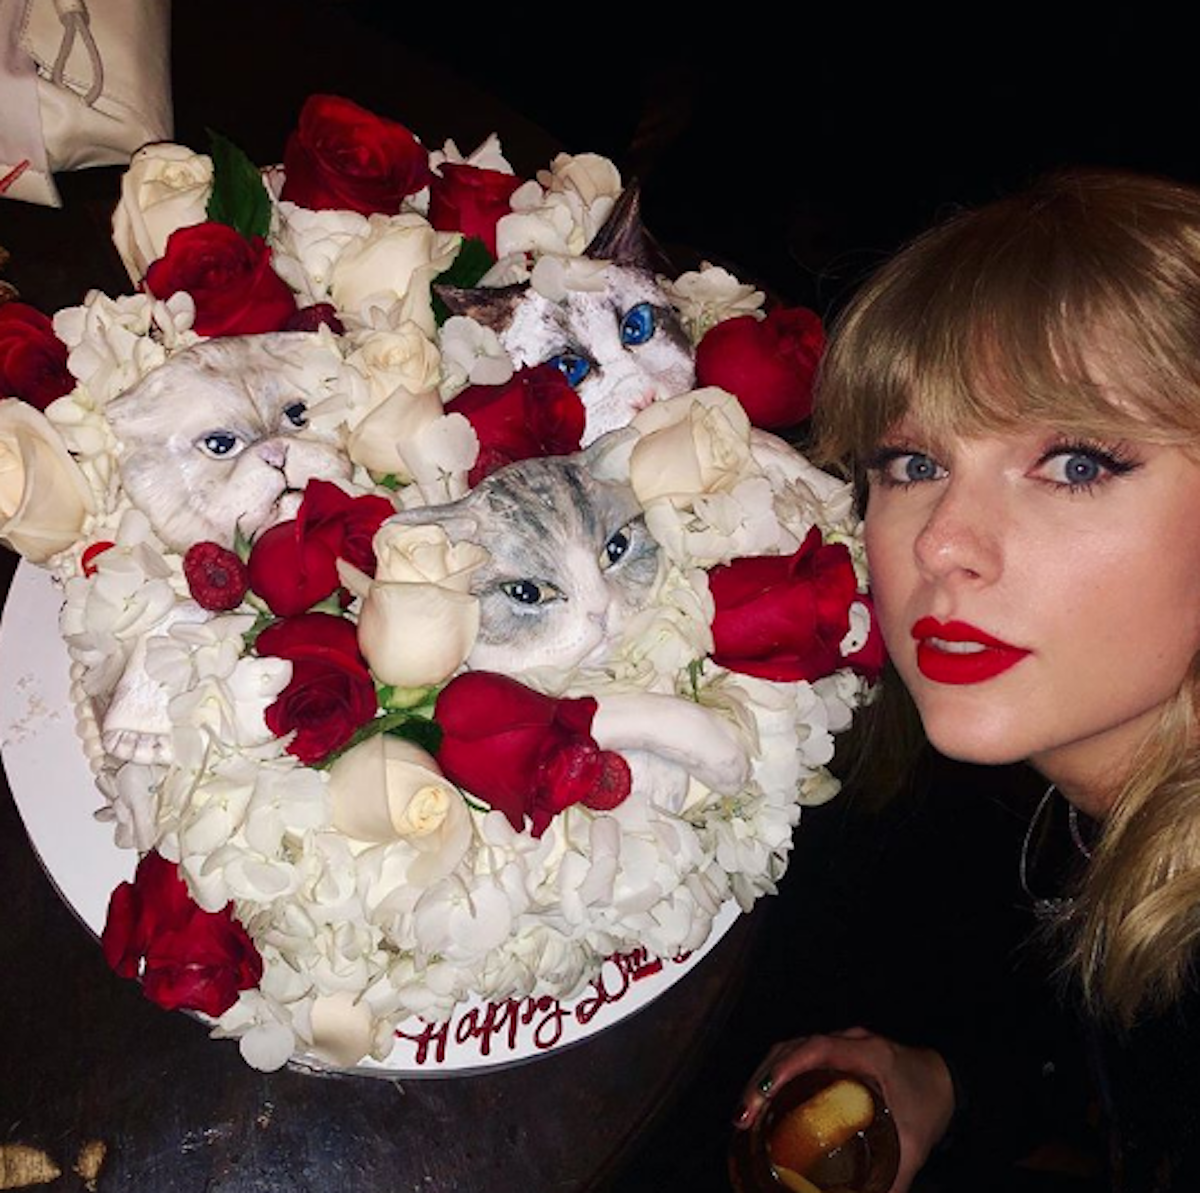 Taylor Swift Rings In 30 With A Festive StarStudded Bash! Perez Hilton